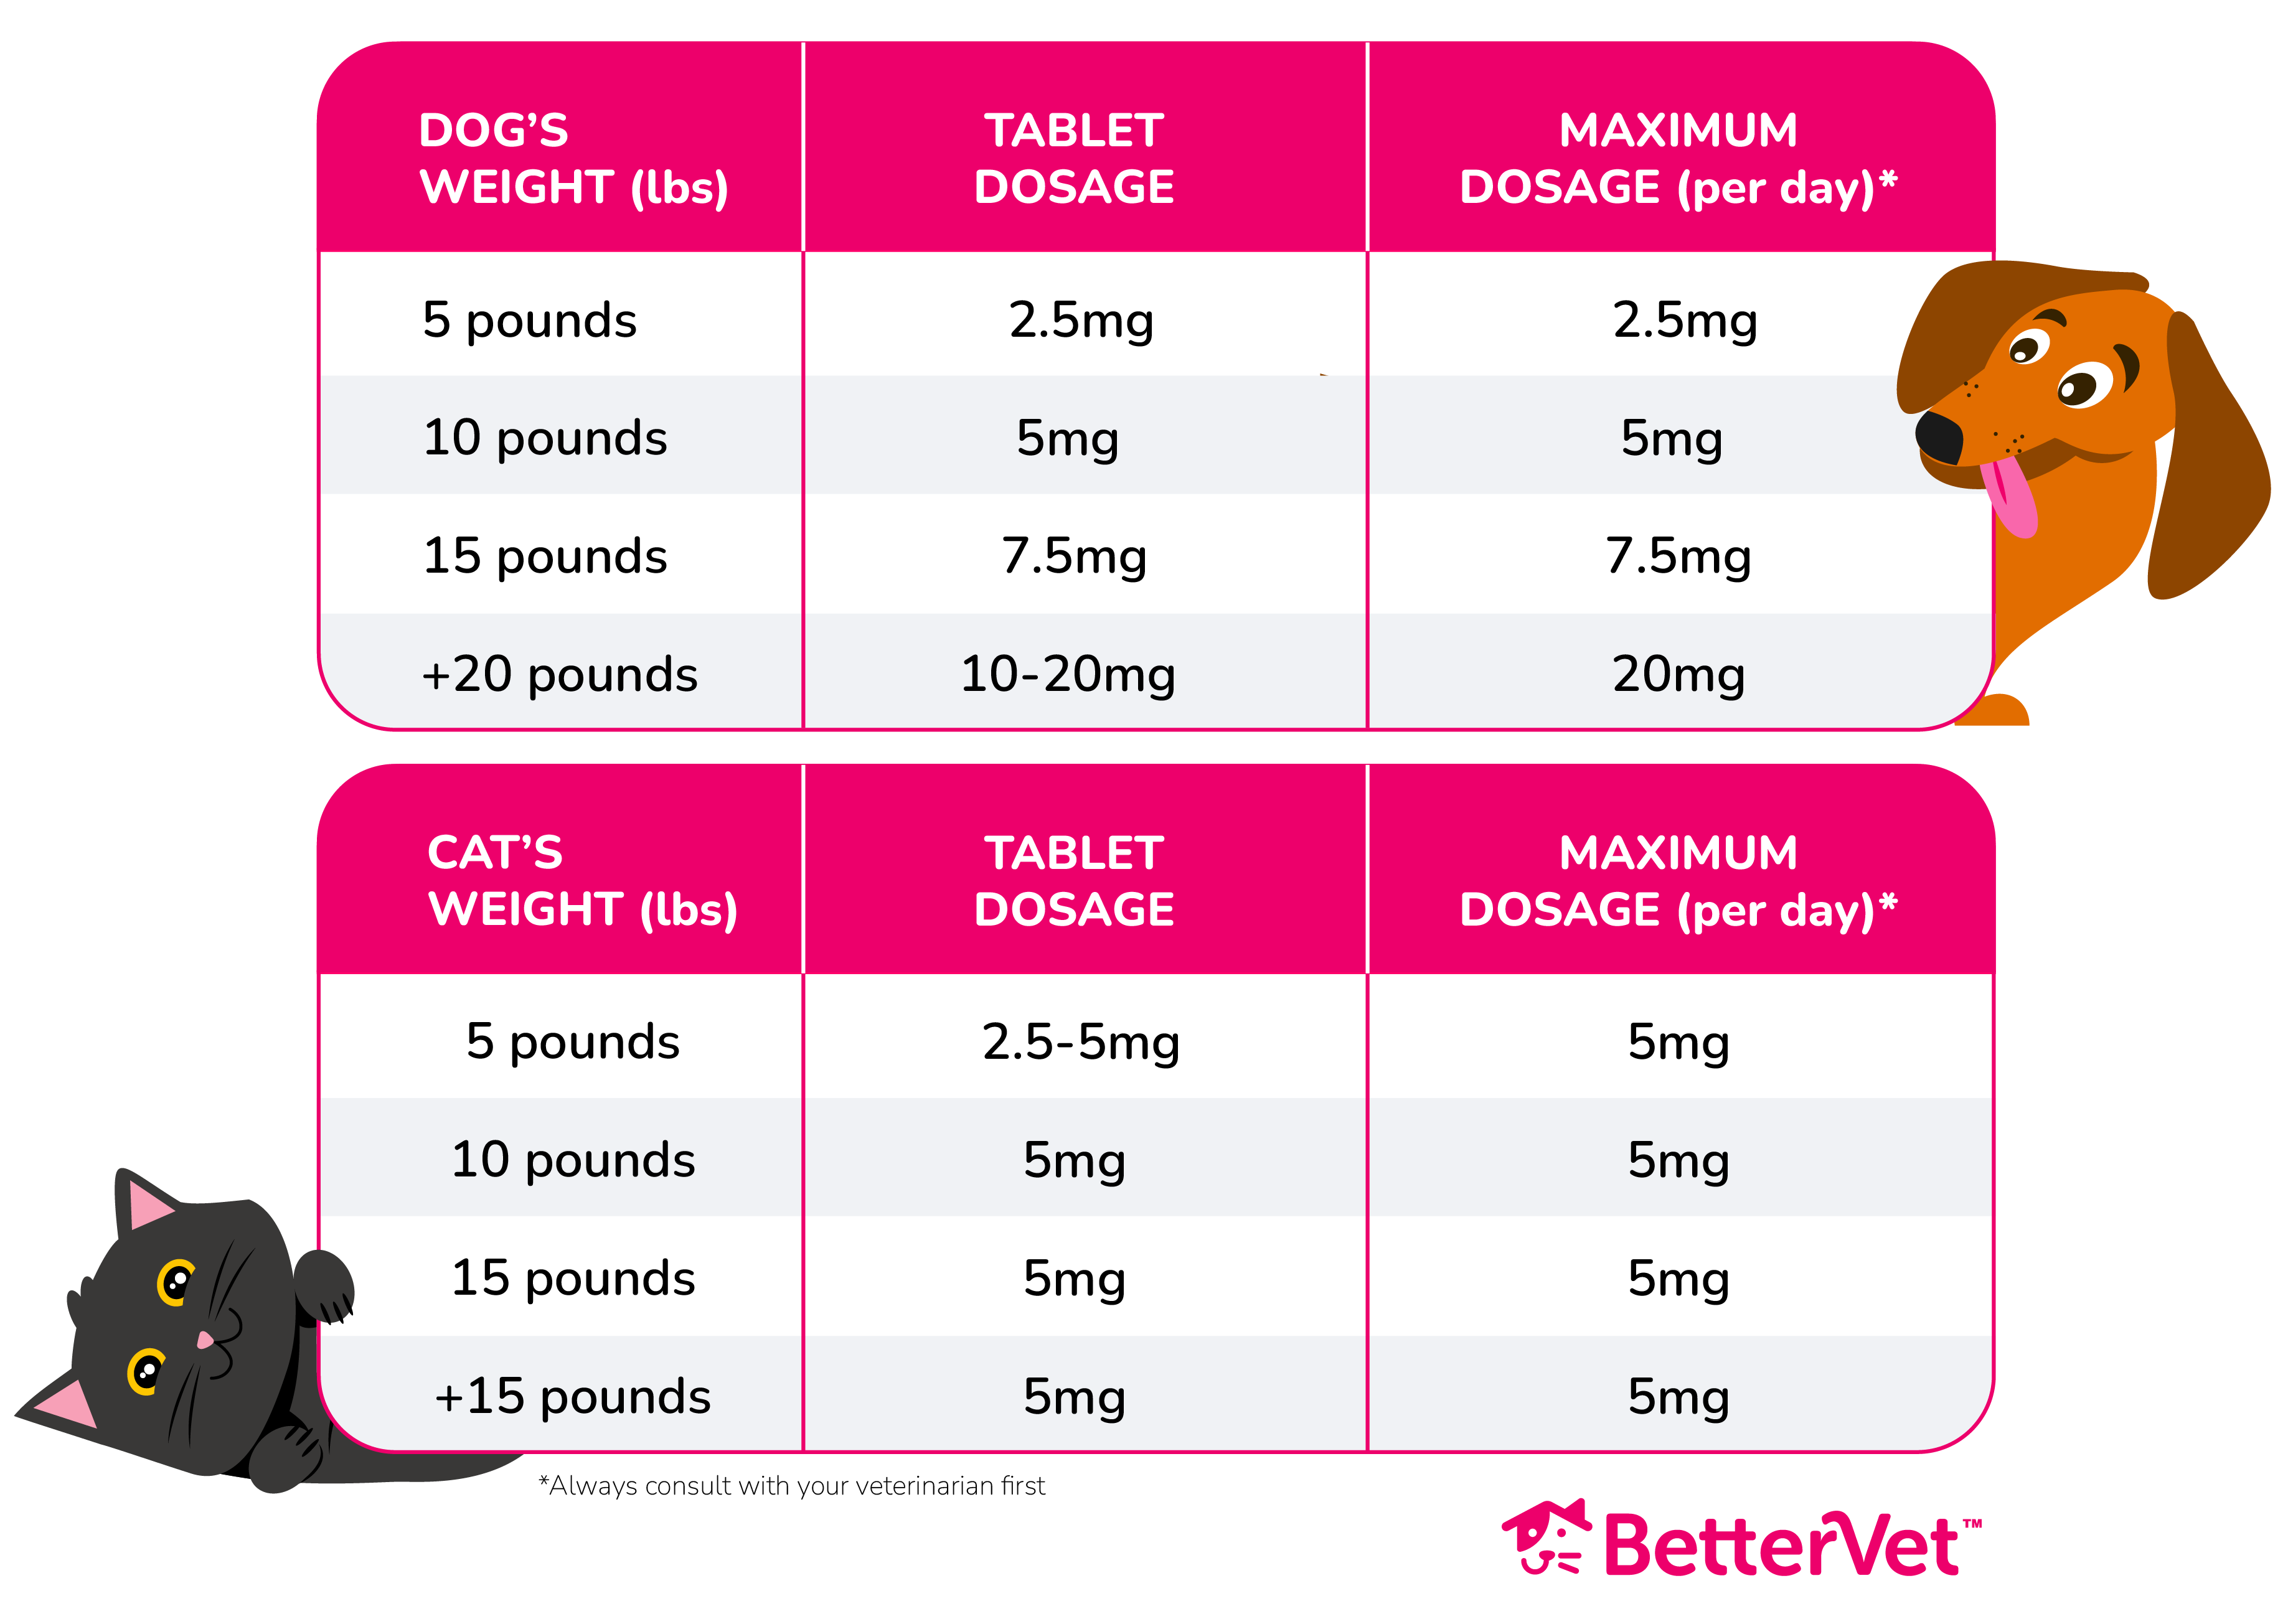 Zyrtec dosage amount table for pets, based on weight in pounds (lbs). Separated by cat and dog.